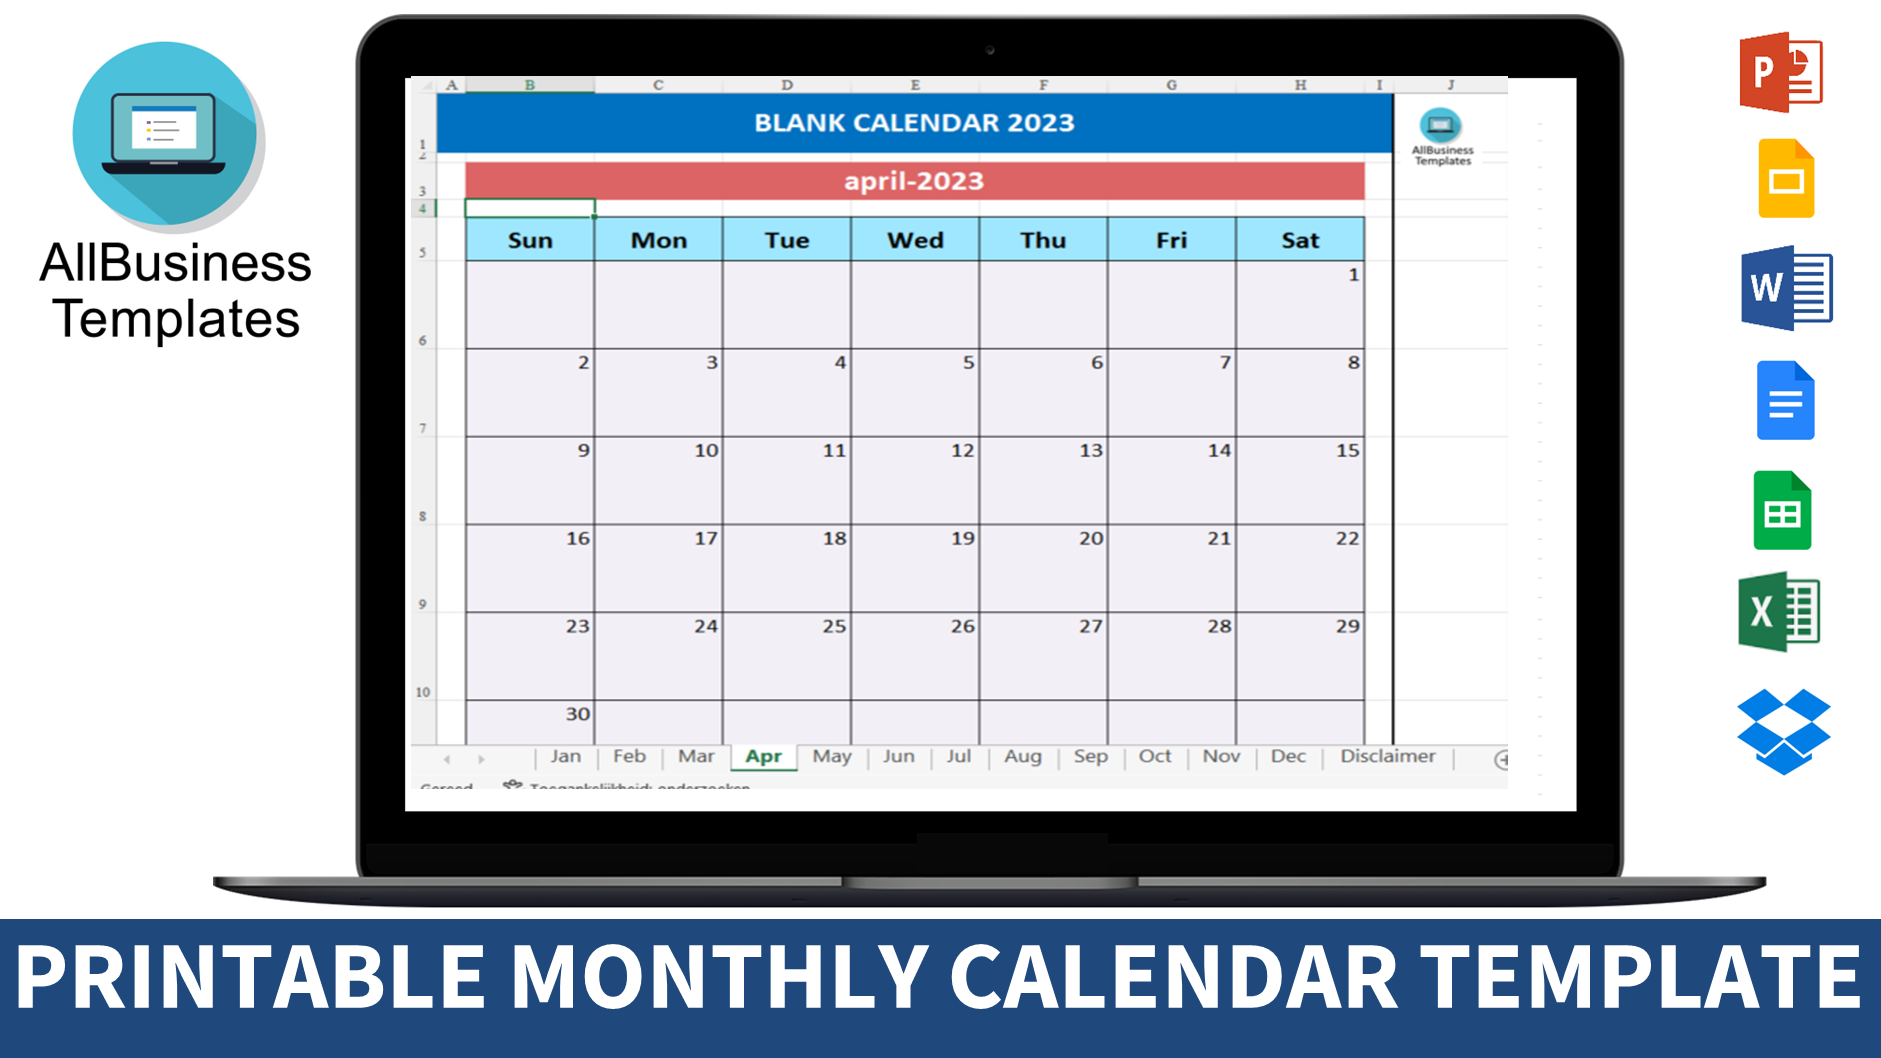 Printable Monthly Calendar Sample Templates At